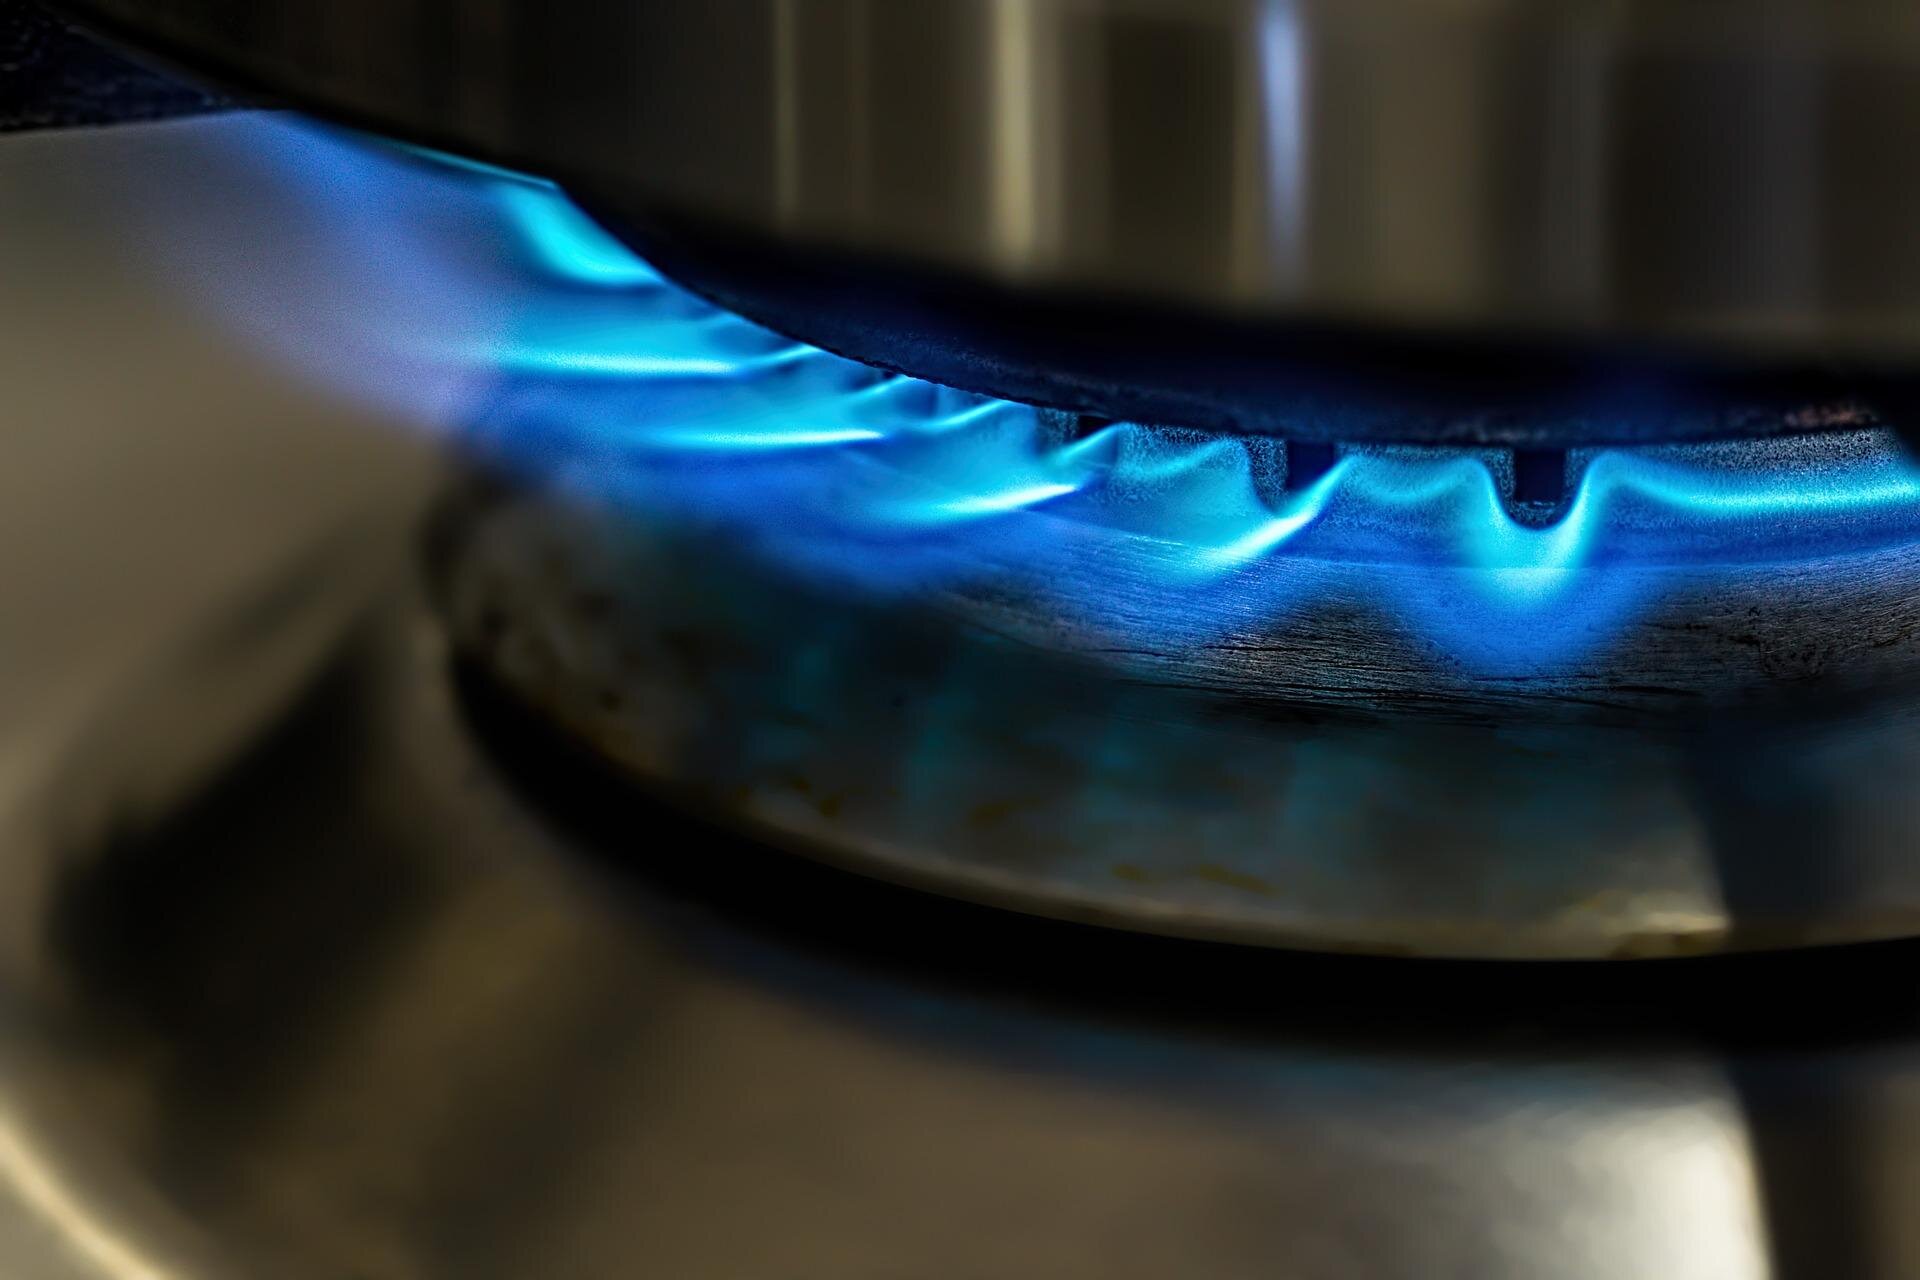 Natural gas used in homes contains hazardous air pollutants, shows Boston-area study